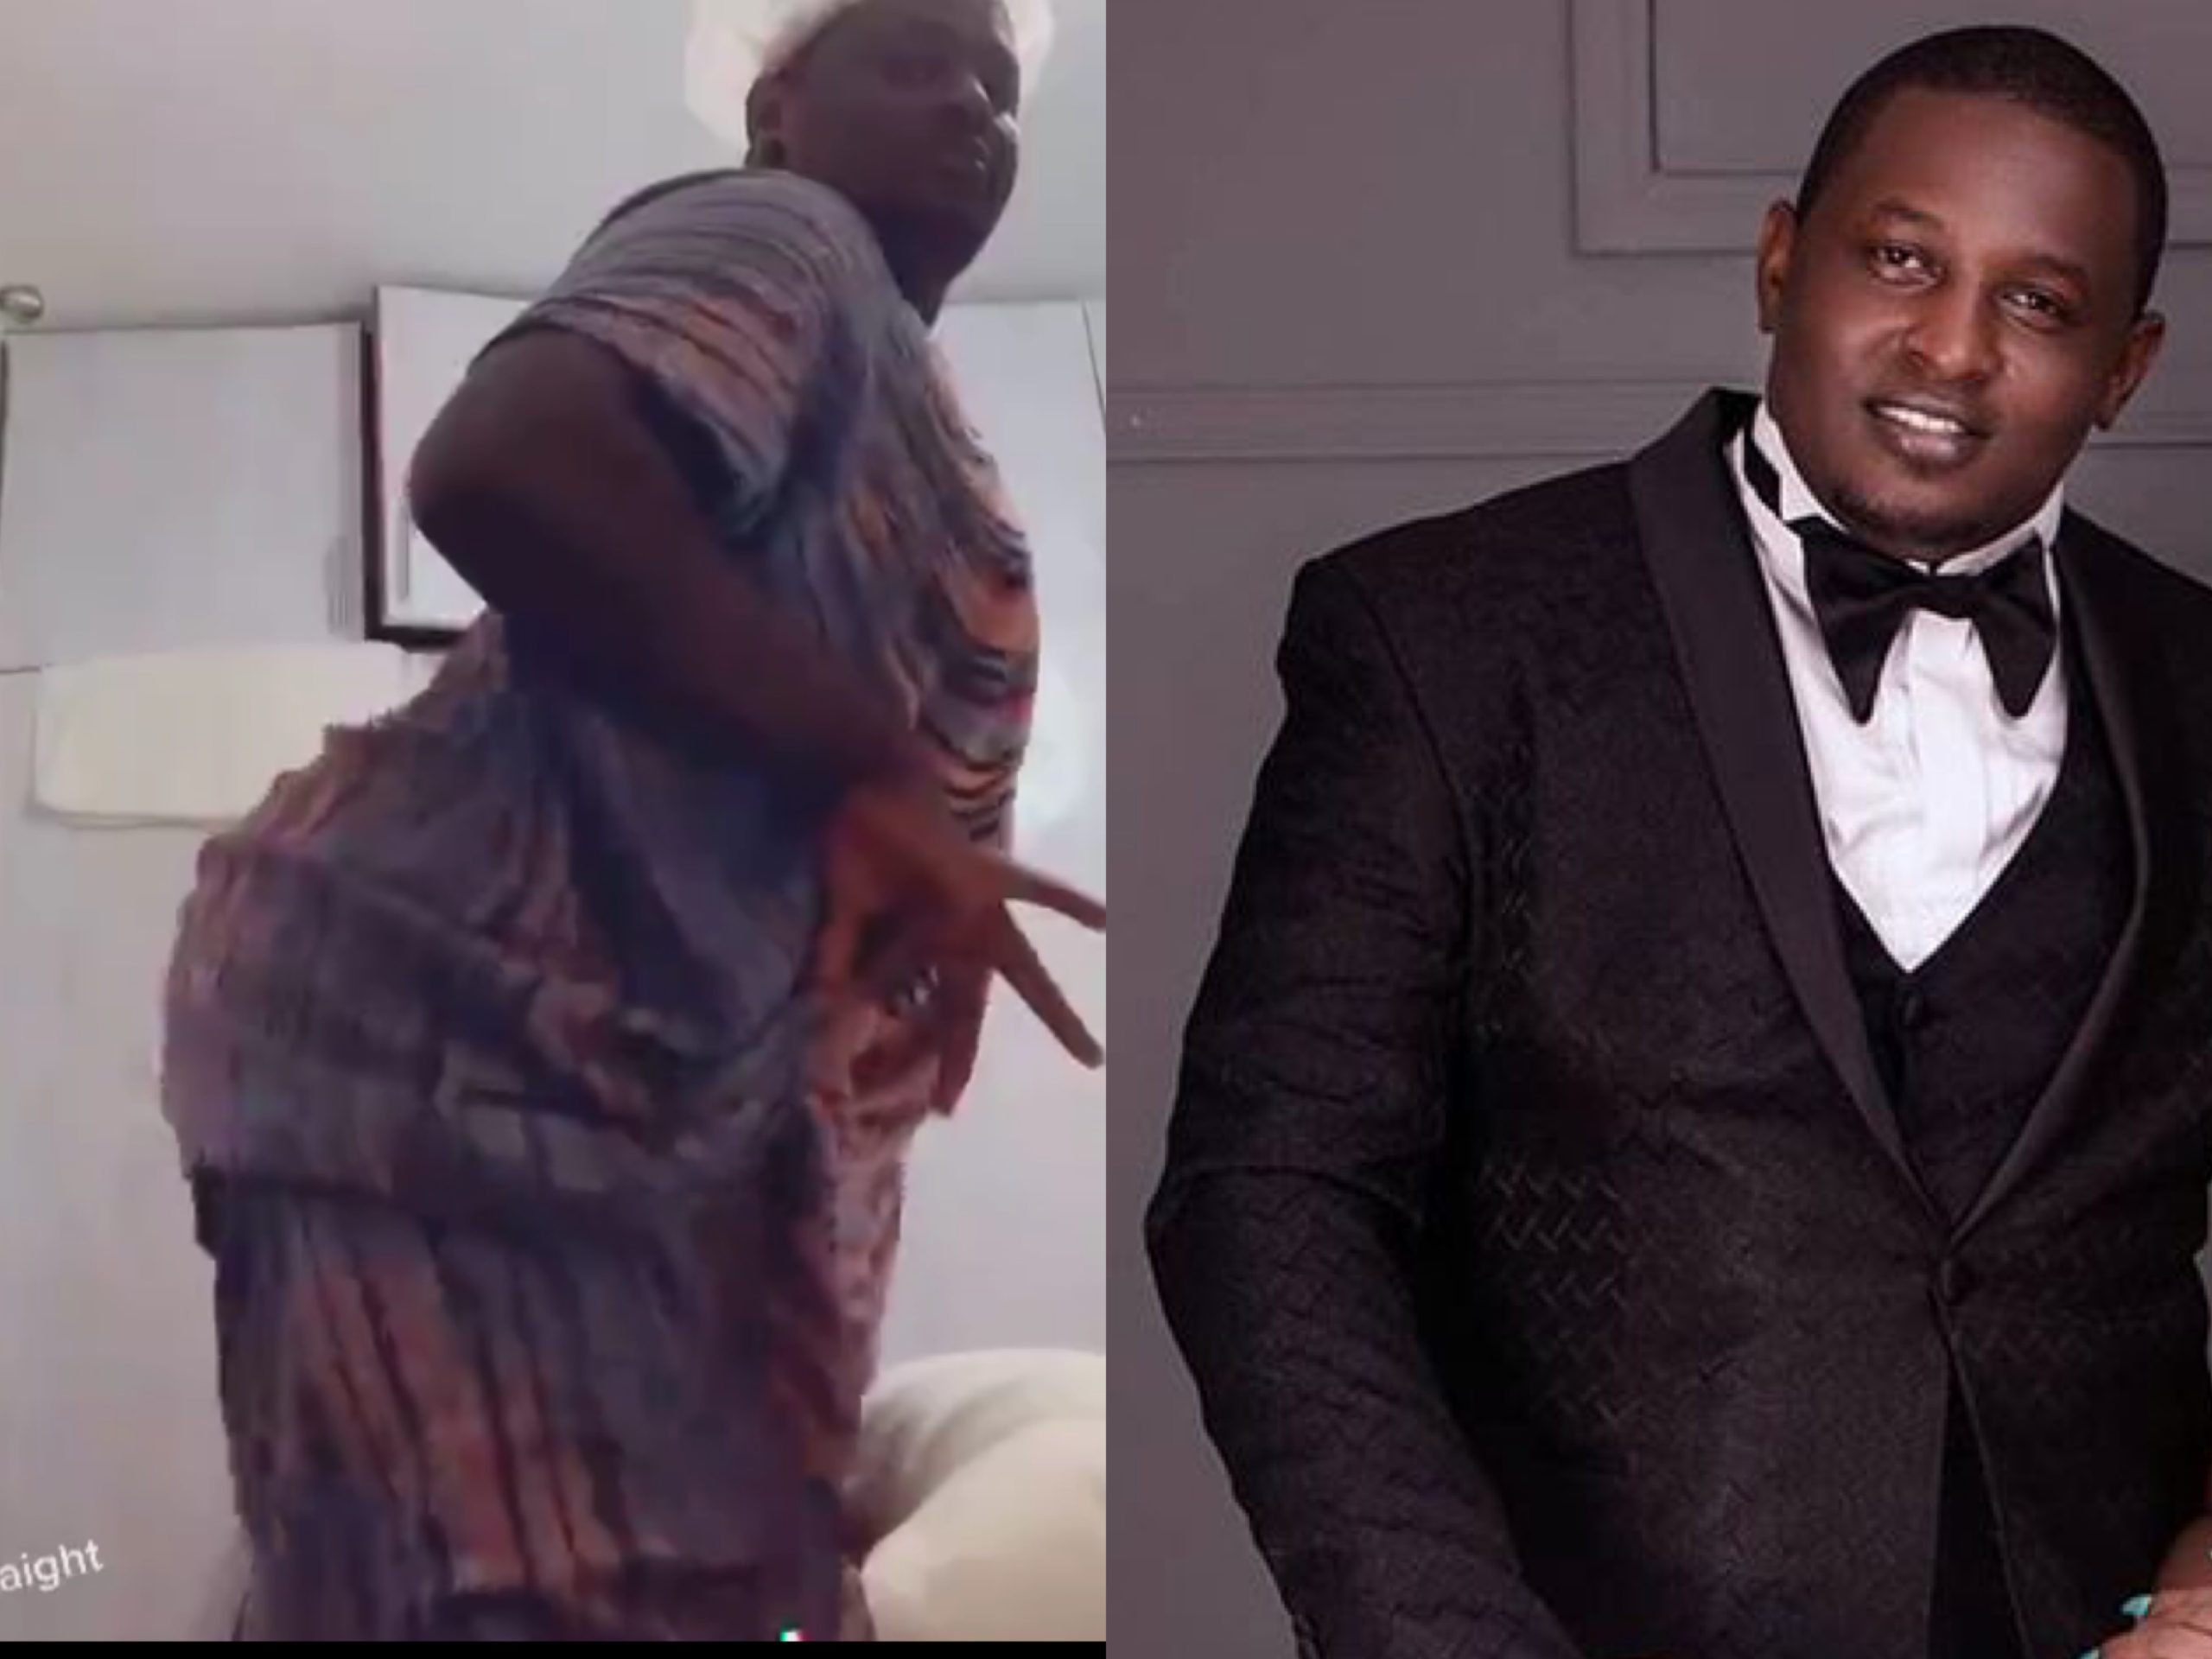 “It’s just art,” Comedian Terence creative defends himself after showing off his twerking skills in new post (Video)